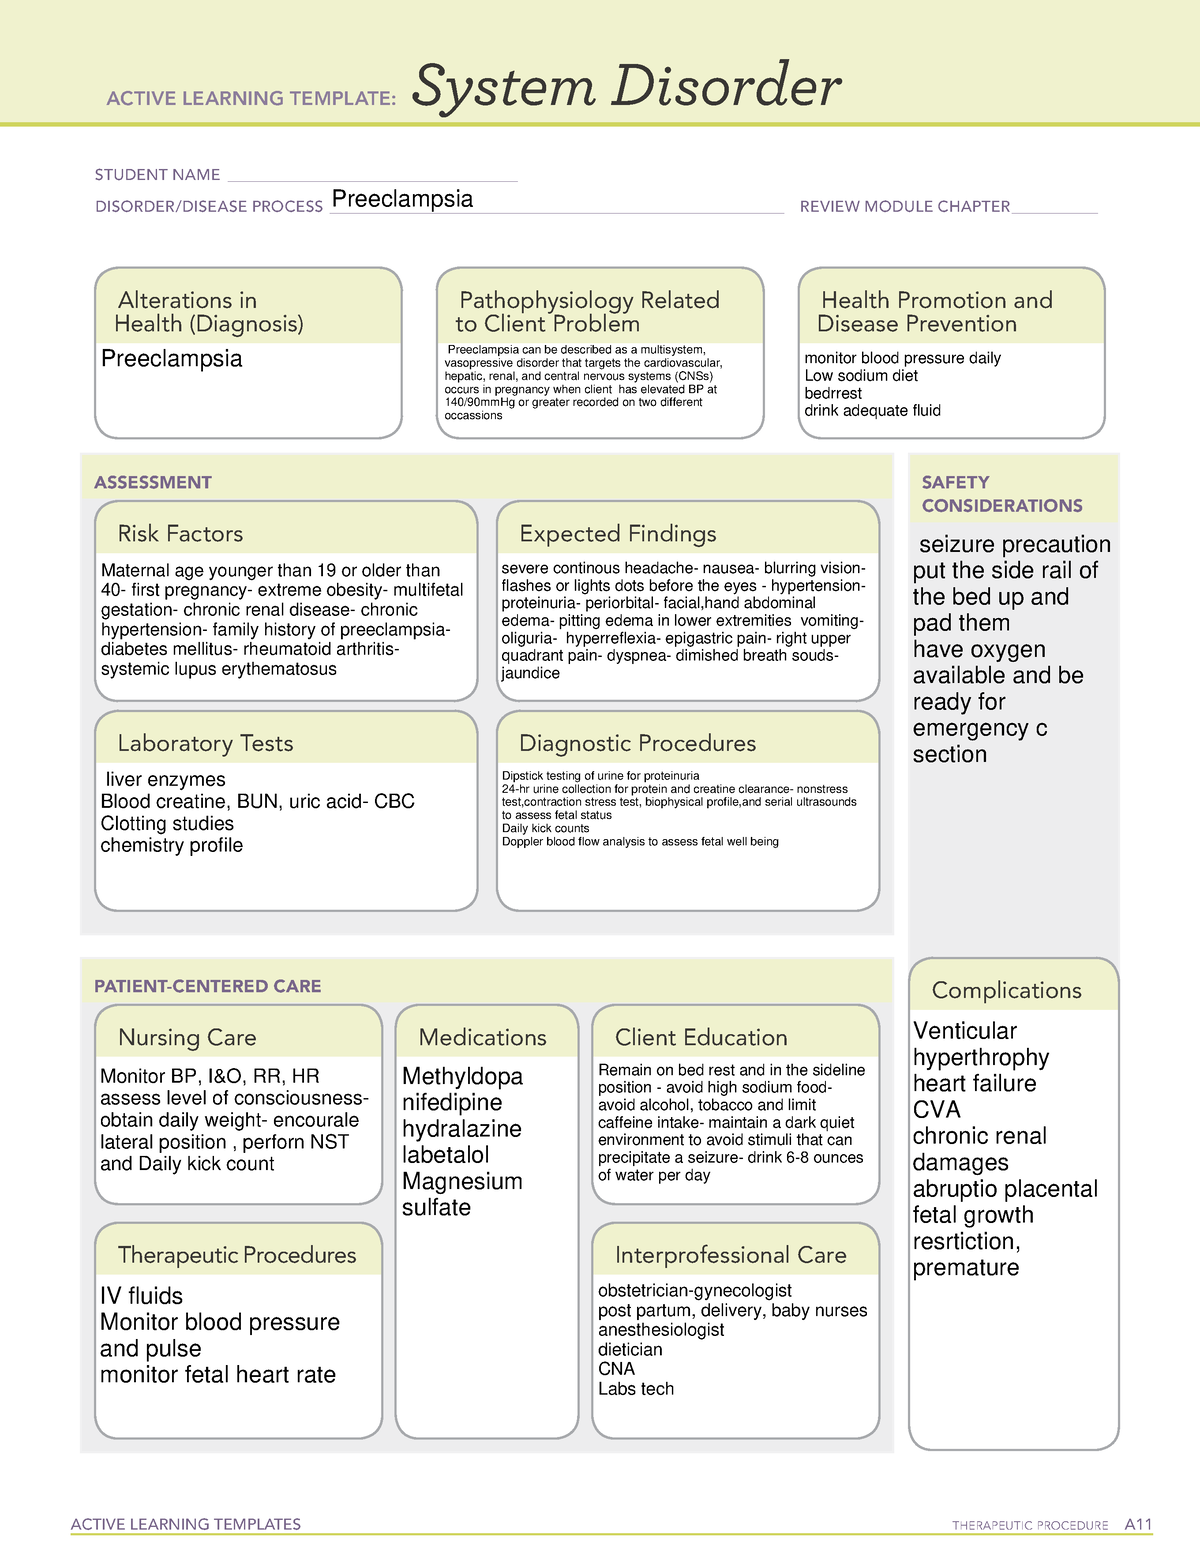 Preeclampsiaaa - Lecture notes 1 - ACTIVE LEARNING TEMPLATES ...